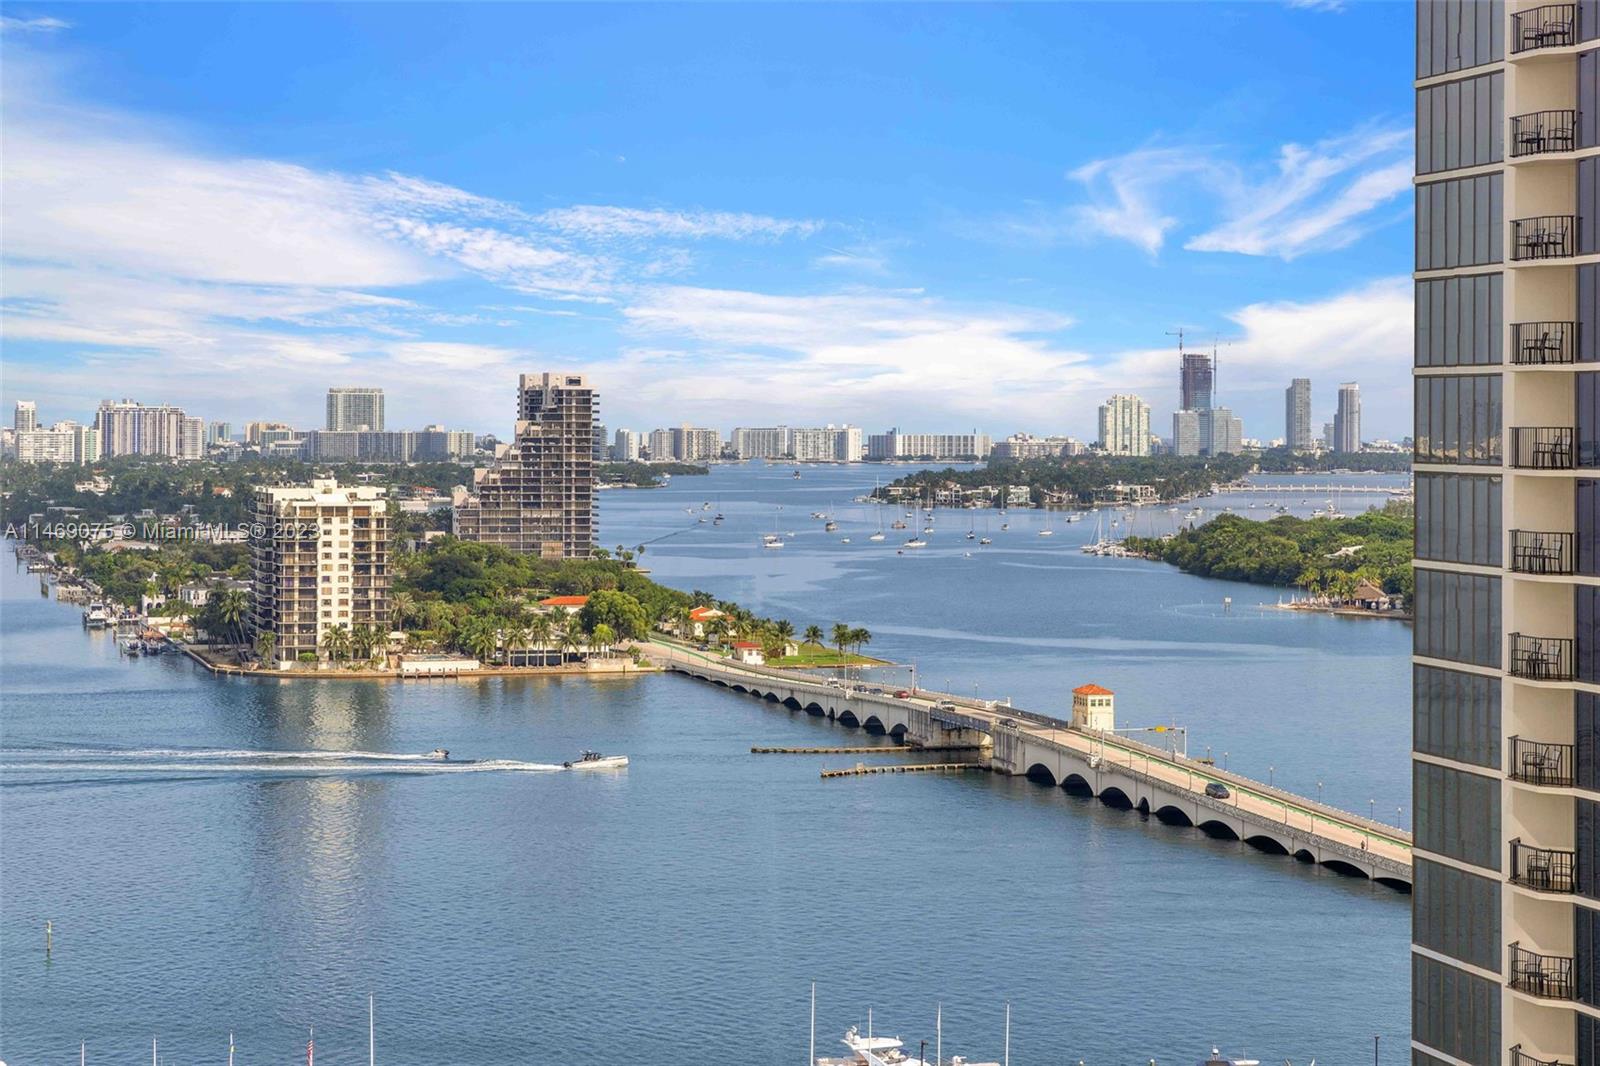 Stunning 3BR, 3BA fully furnished apartment with breathtaking Biscayne Bay views and a front-row seat to Downtown's vibrant skyline! Discover luxury living at The Grand Condominium. The Grand offers a variety of amenities all conveniently located in the building including a state of the art gym, pool area, marina, 5 restaurants, food market, 24 hour Concierge, security and much more.
The unit is available after April 1st, 2024